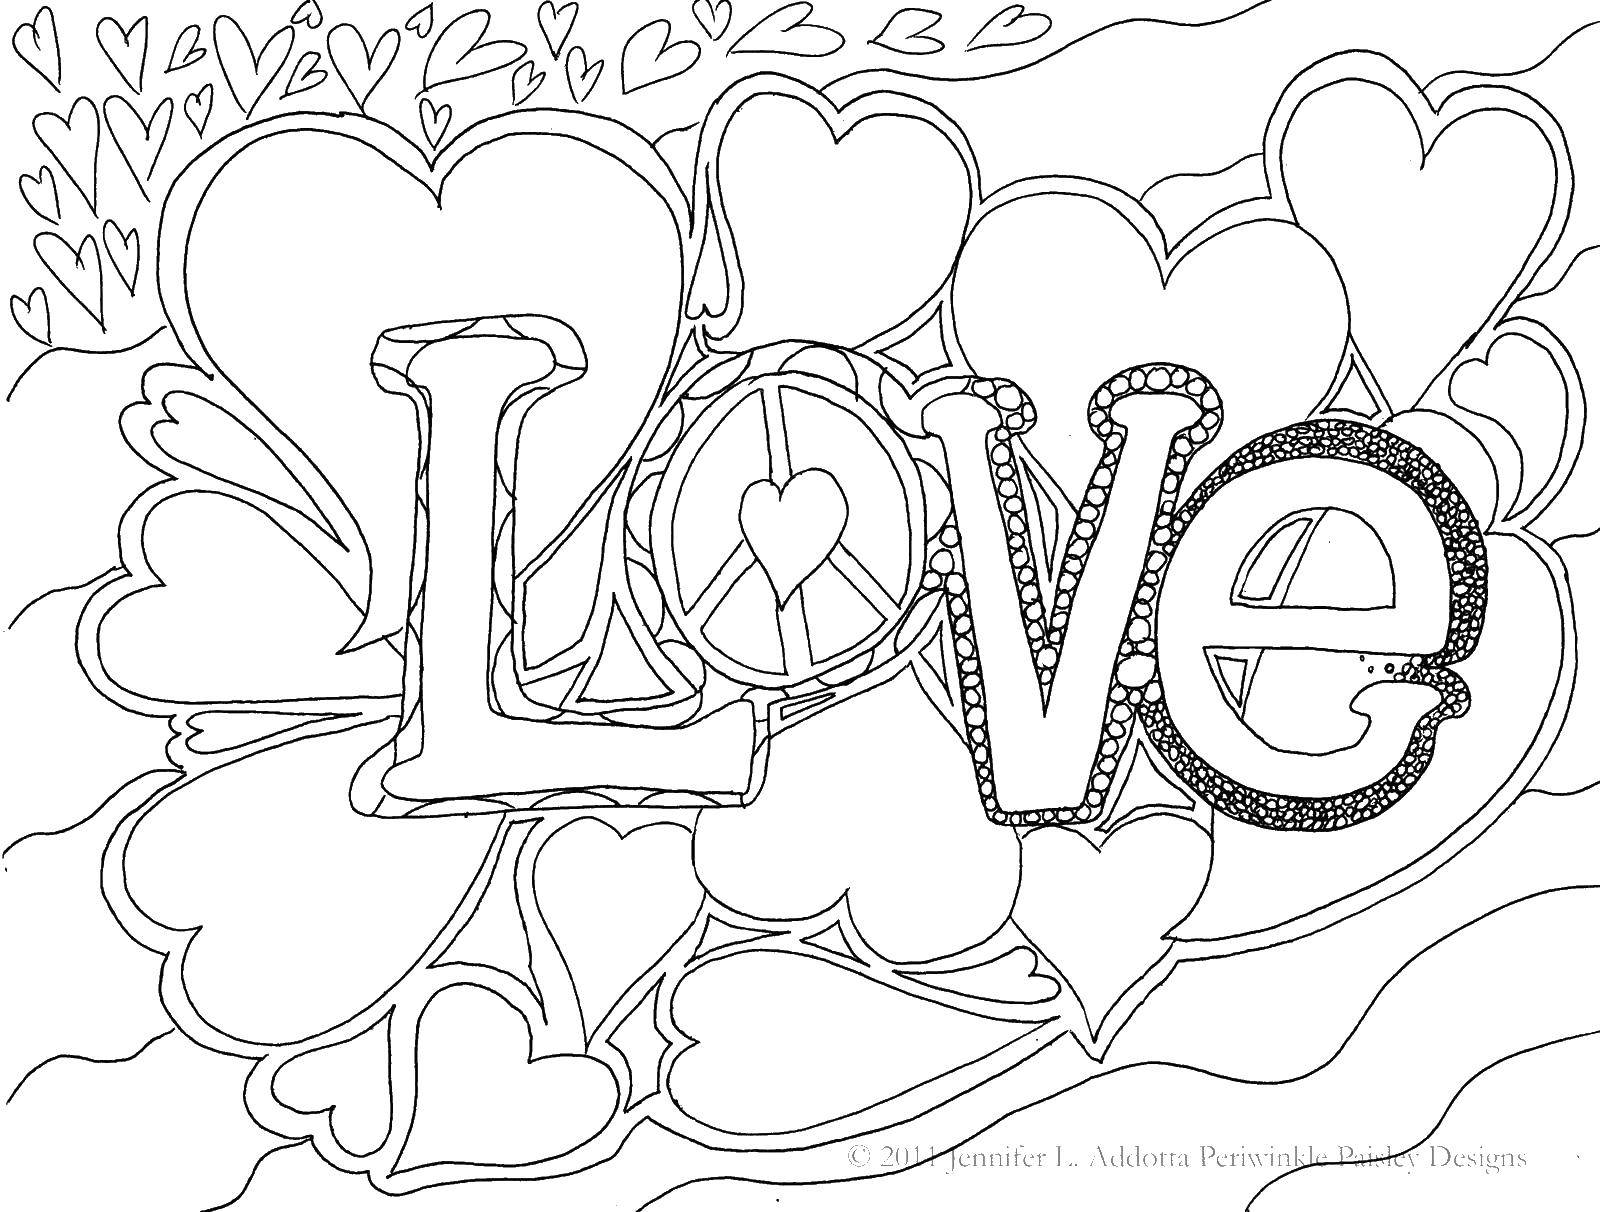 Coloring The inscription love. Category I love you. Tags:  Love, inscription, patterns, hearts.